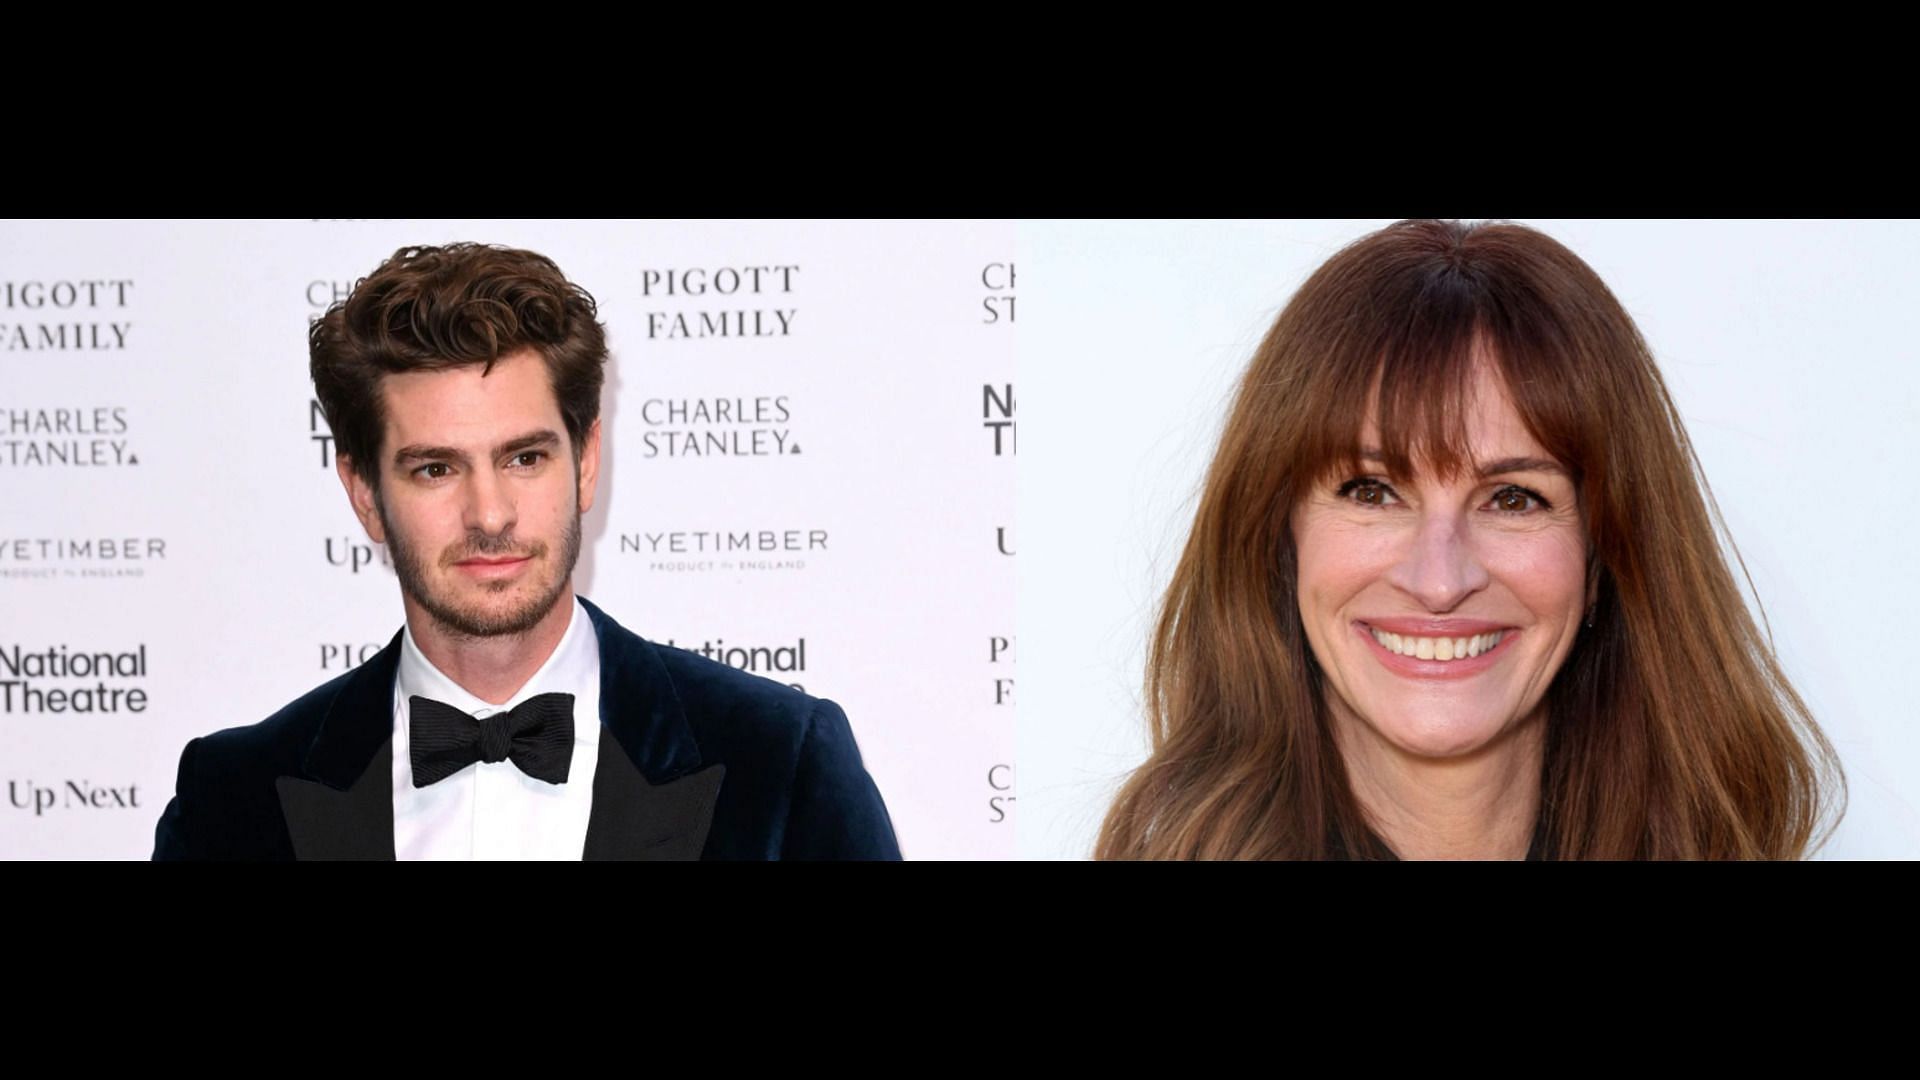  Andrew Garfield and Julia Roberts(Photo by Eamonn M. McCormack/Getty Images and Photo by Pascal Le Segretain/Getty Images)